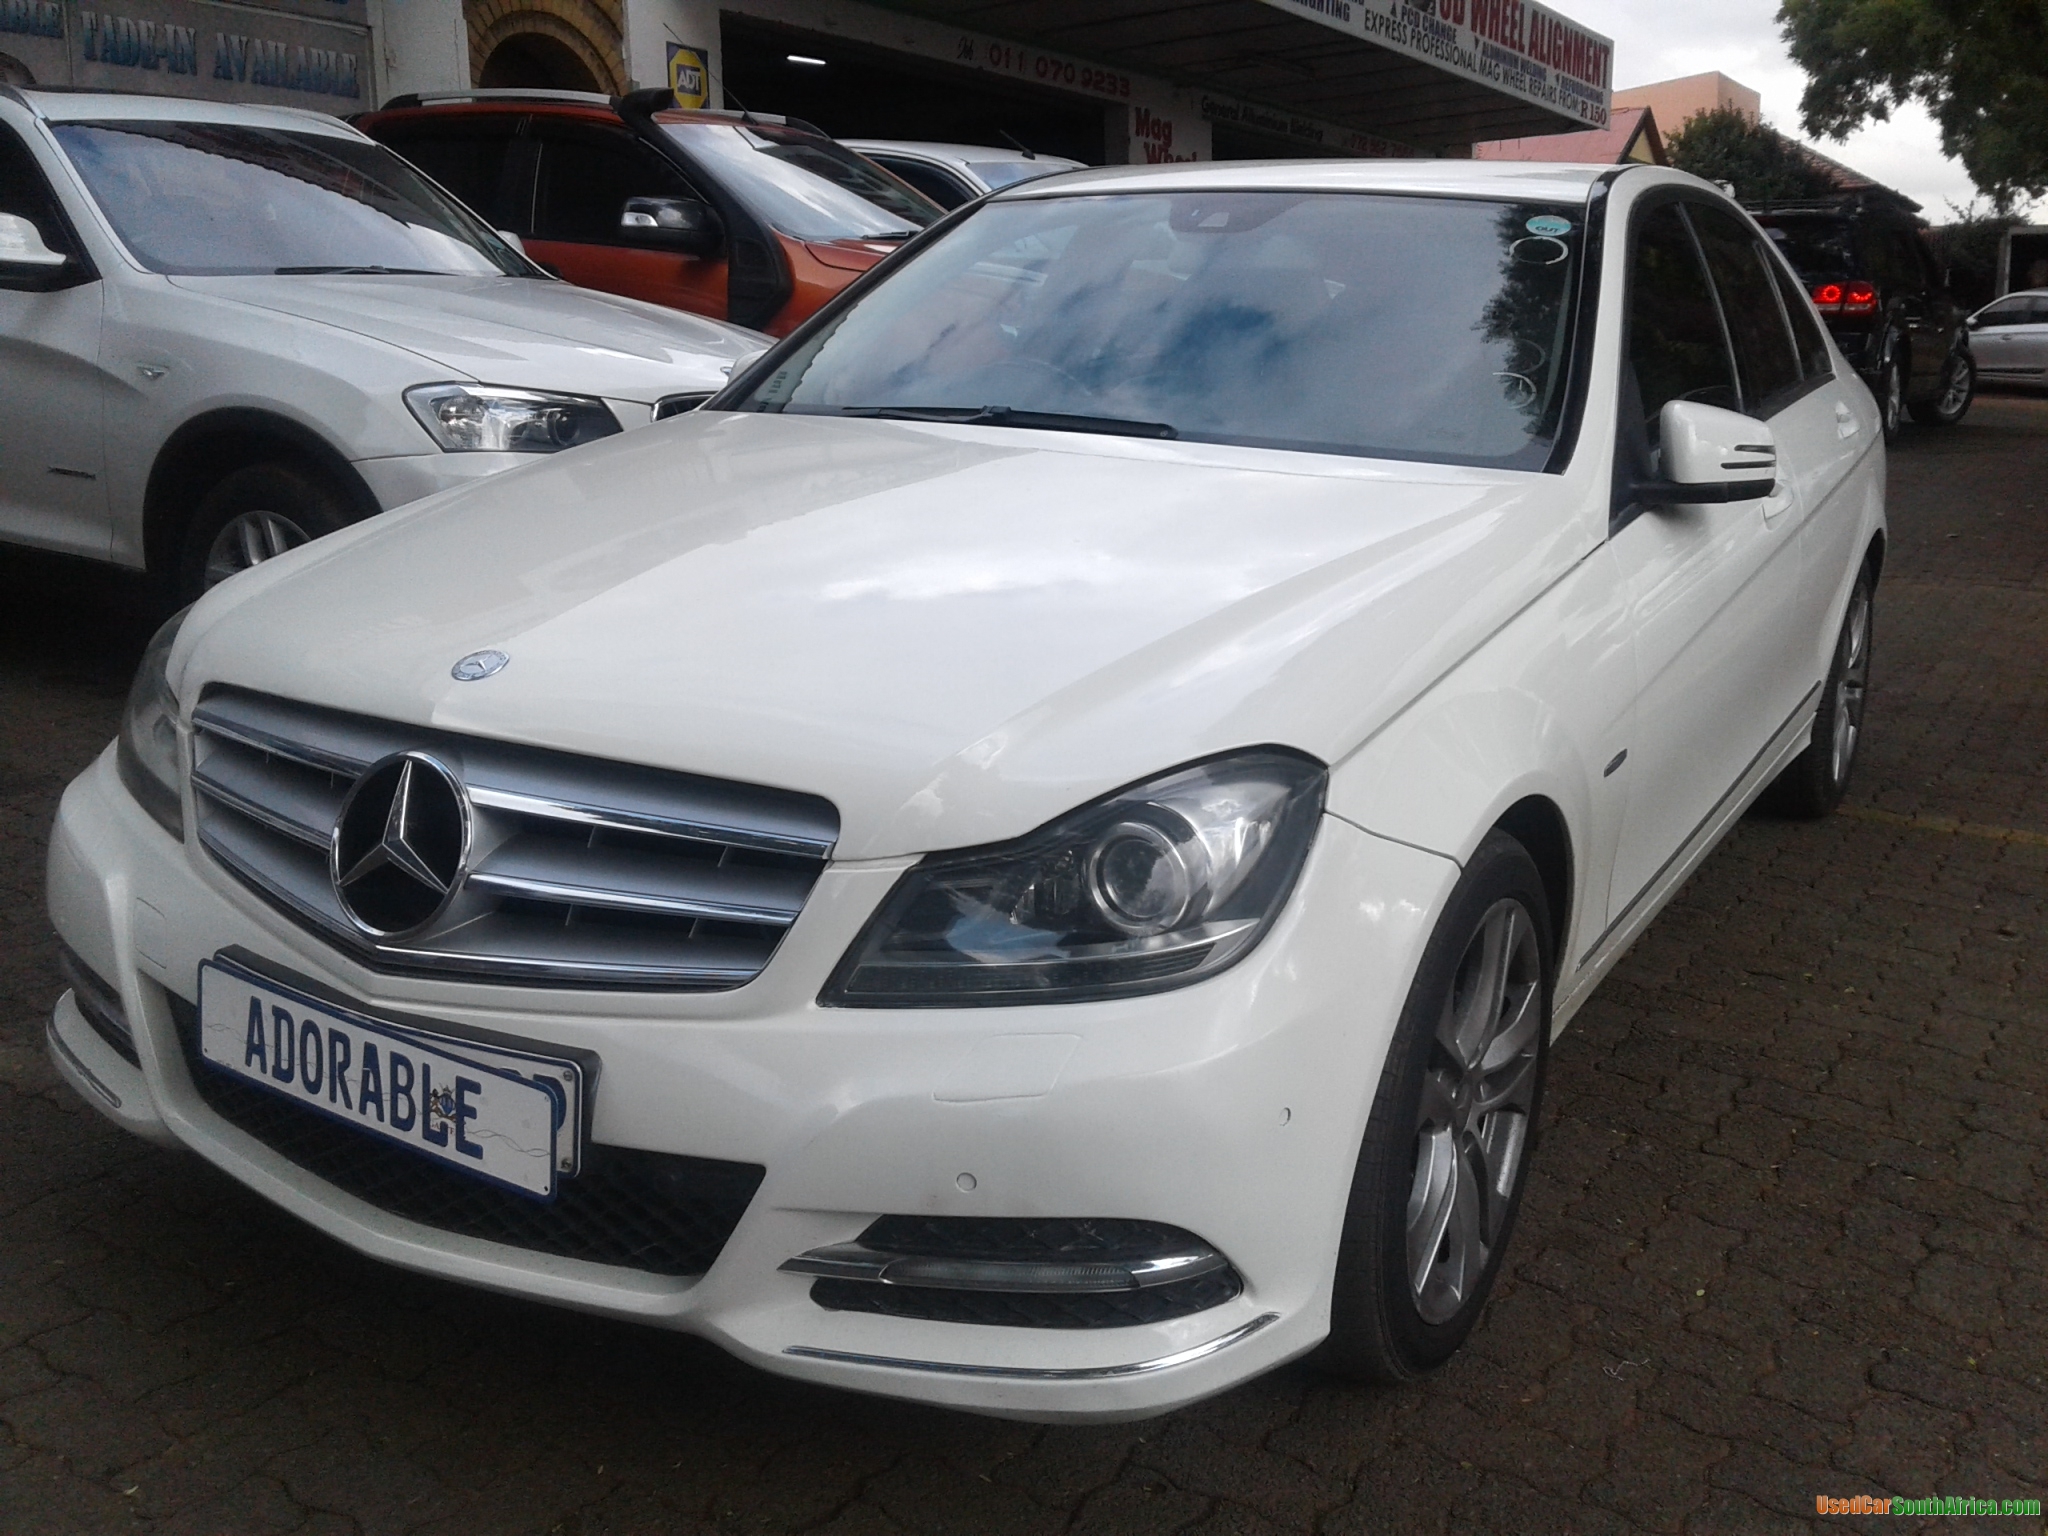 2011 Mercedes Benz C180 CGI used car for sale in Johannesburg City ...